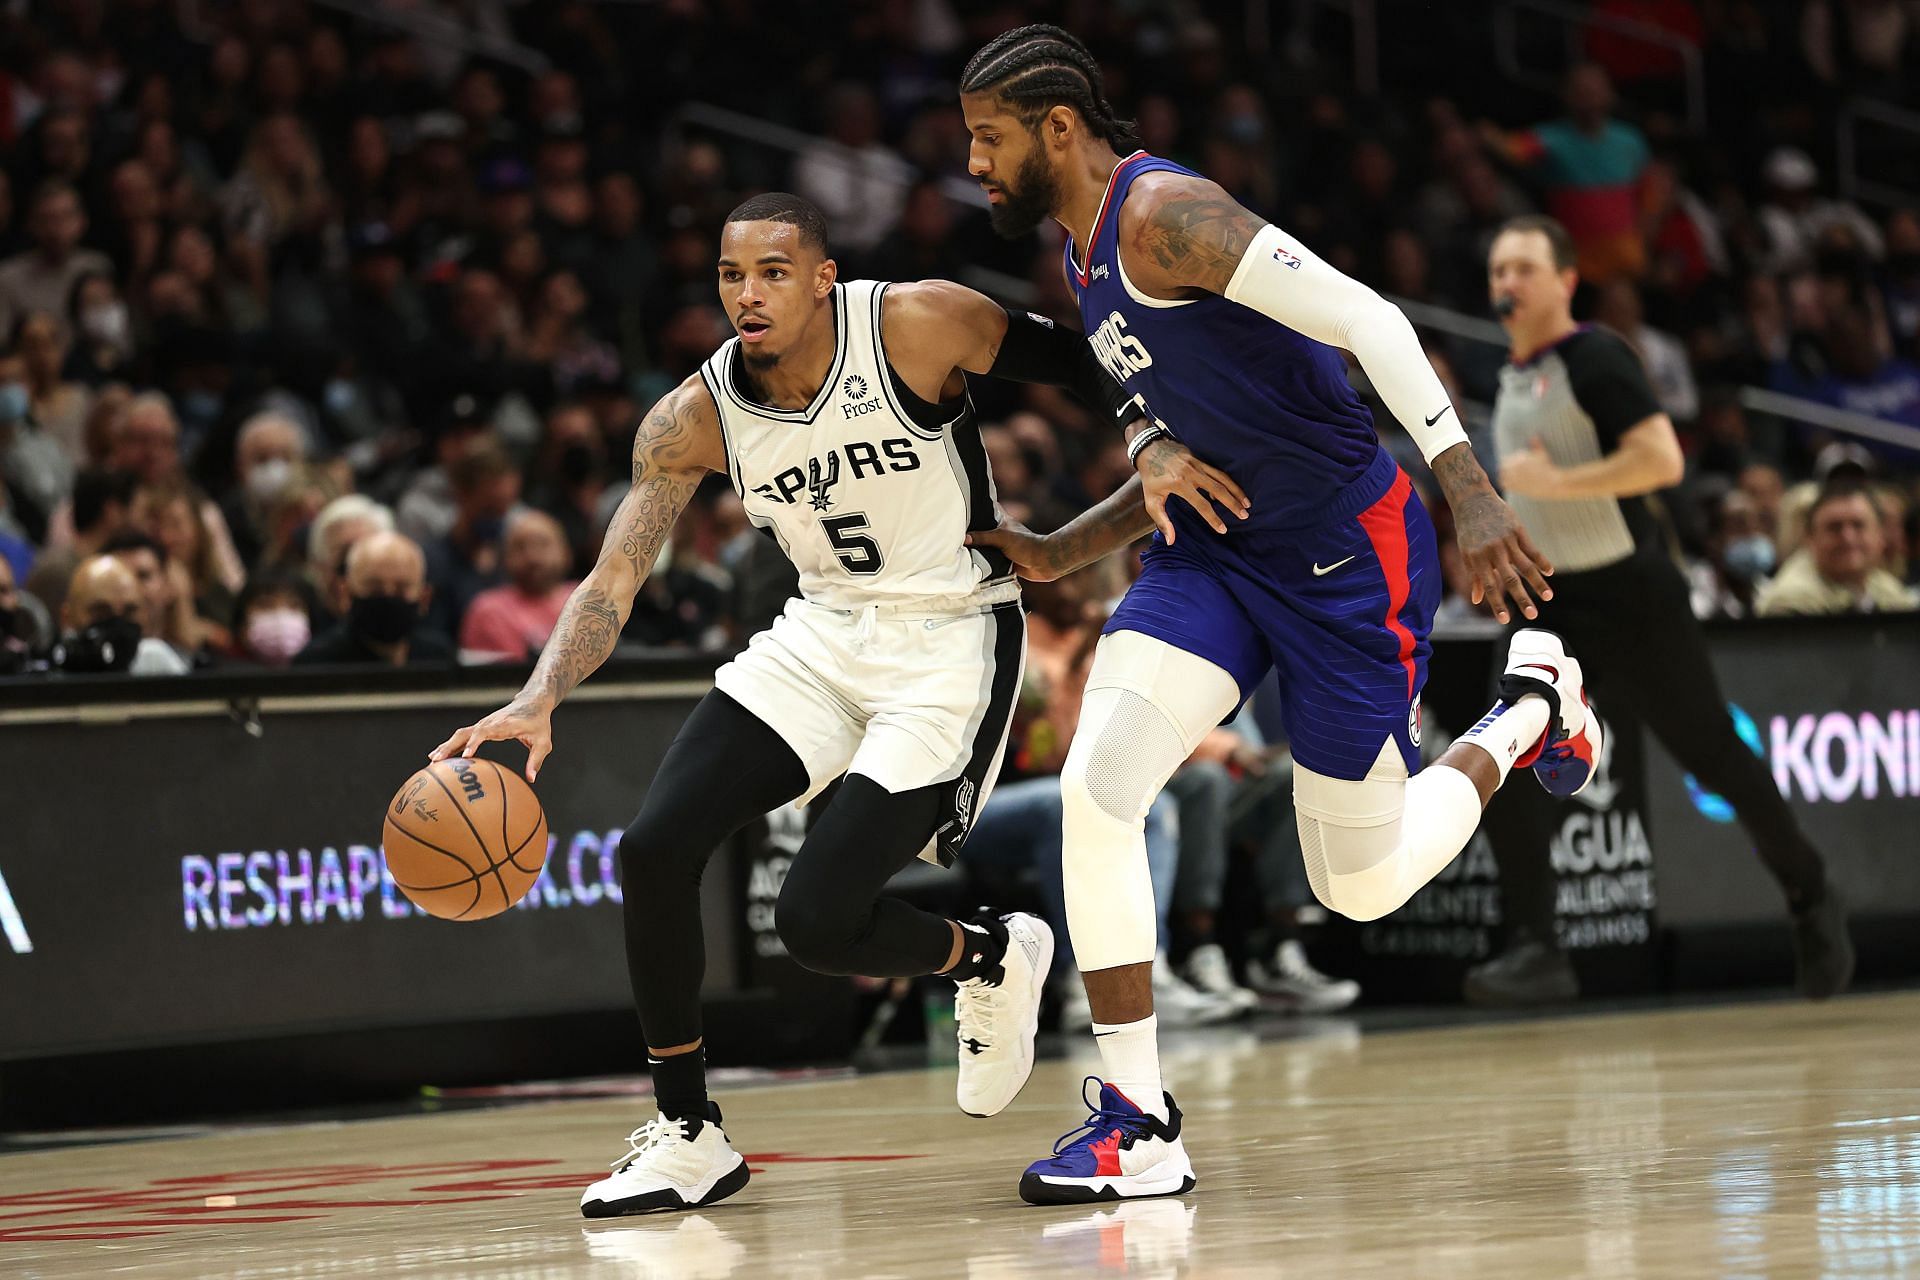 Paul George of the LA Clippers defends against Dejounte Murray of the San Antonio Spurs during the second half on November 16, 2021, in Los Angeles, California.